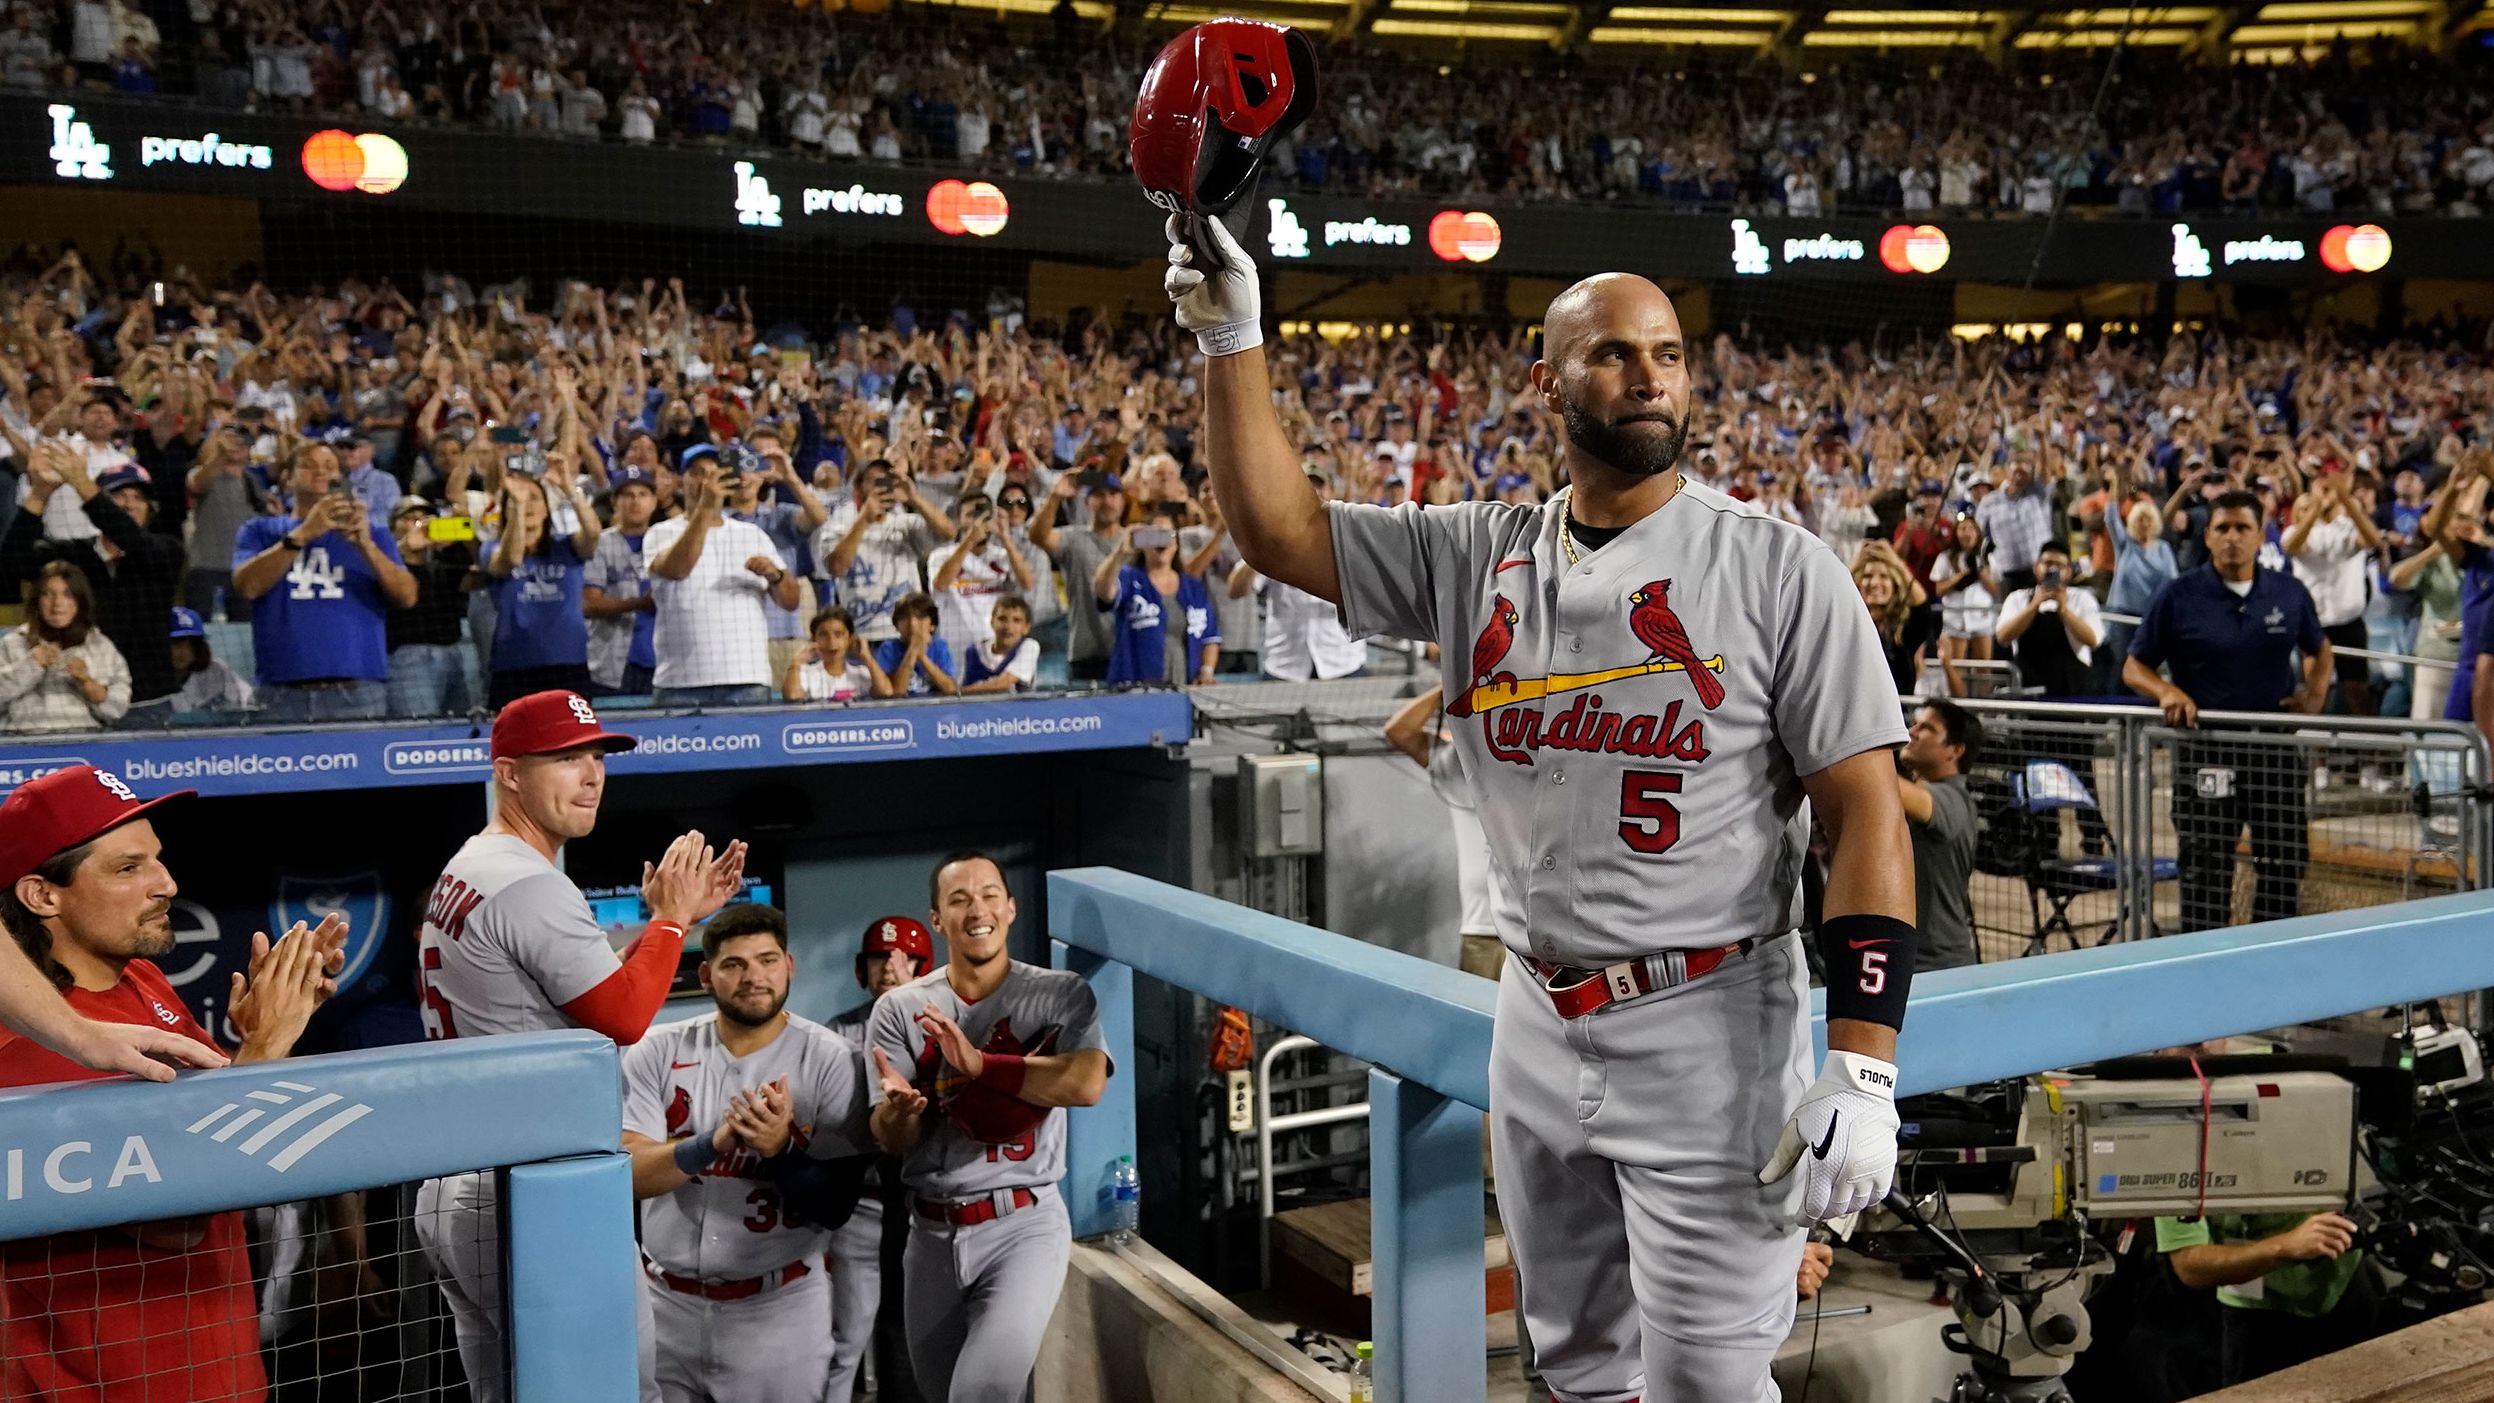 St. Louis' Albert Pujols acknowledges the crowd in Los Angeles after <a href="https://www.cnn.com/2022/09/23/sport/albert-pujols-700-career-home-runs-spt" target="_blank">hitting his 700th career home run</a> on Friday, September 23. He is only the fourth player in Major League Baseball history to hit 700 home runs, joining Barry Bonds, Hank Aaron and Babe Ruth.